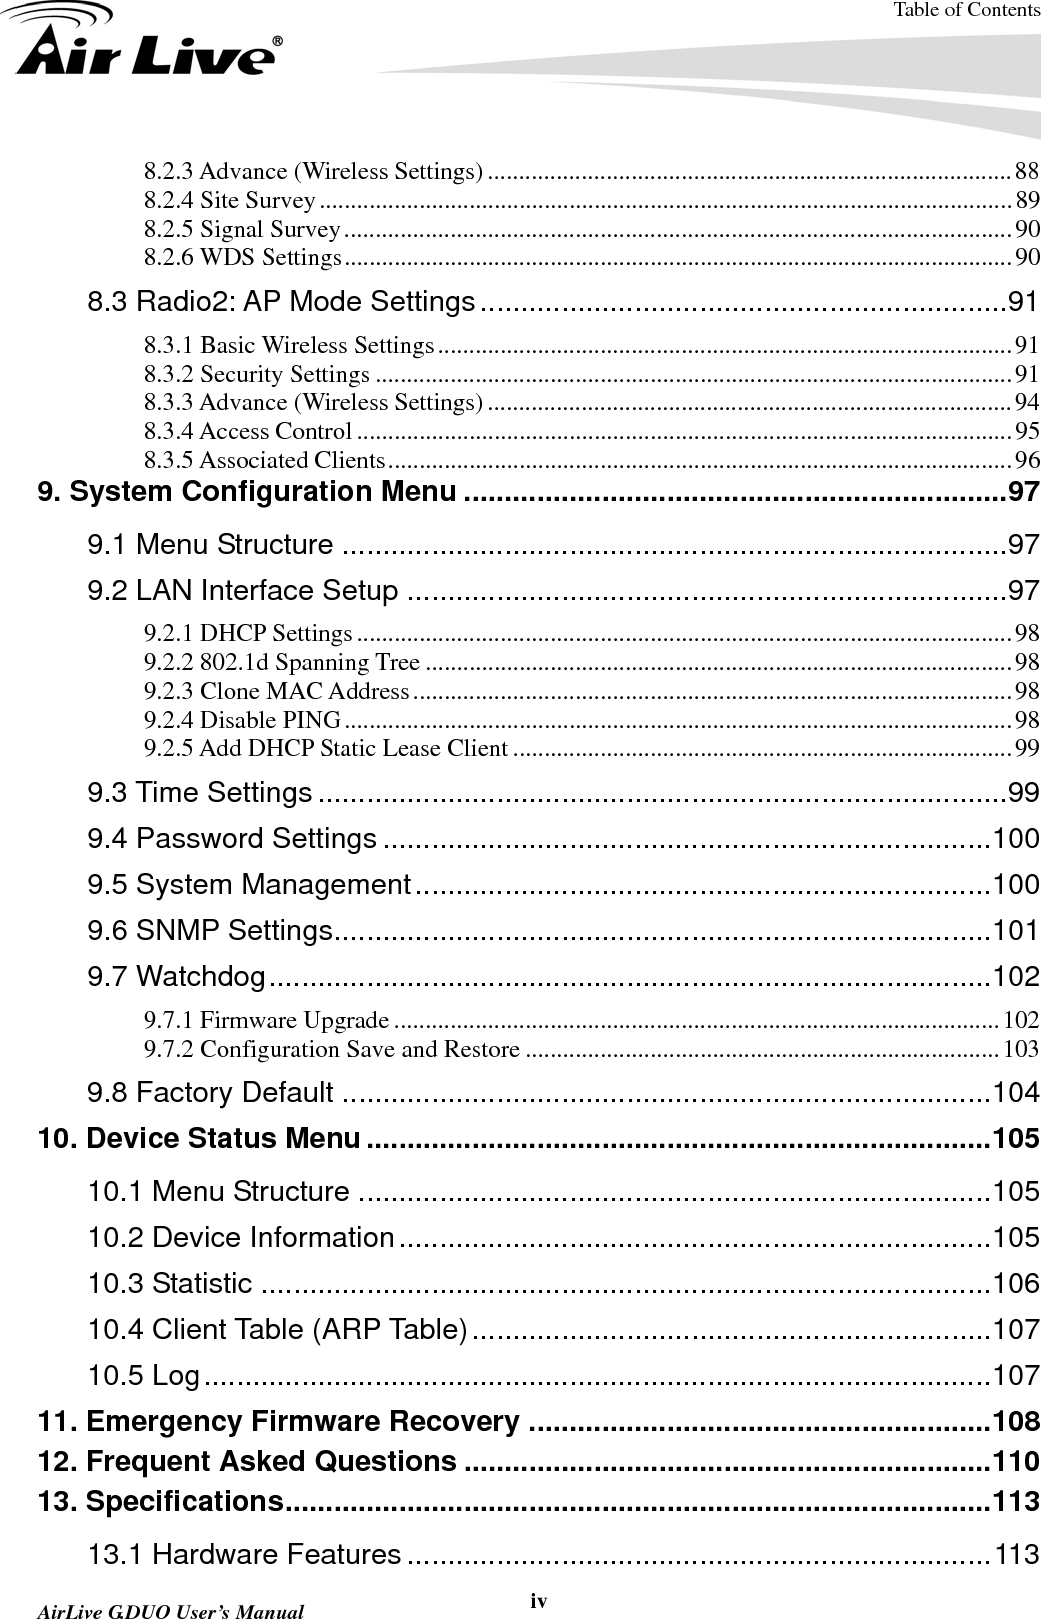 Table of Contents  AirLive G.DUO User’s Manual  iv8.2.3 Advance (Wireless Settings) .................................................................................... 88 8.2.4 Site Survey ............................................................................................................... 89 8.2.5 Signal Survey ........................................................................................................... 90 8.2.6 WDS Settings ........................................................................................................... 90 8.3 Radio2: AP Mode Settings ................................................................. 91 8.3.1 Basic Wireless Settings ............................................................................................ 91 8.3.2 Security Settings ...................................................................................................... 91 8.3.3 Advance (Wireless Settings) .................................................................................... 94 8.3.4 Access Control ......................................................................................................... 95 8.3.5 Associated Clients .................................................................................................... 96 9. System Configuration Menu ................................................................... 97 9.1 Menu Structure .................................................................................. 97 9.2 LAN Interface Setup .......................................................................... 97 9.2.1 DHCP Settings ......................................................................................................... 98 9.2.2 802.1d Spanning Tree .............................................................................................. 98 9.2.3 Clone MAC Address ................................................................................................ 98 9.2.4 Disable PING ........................................................................................................... 98 9.2.5 Add DHCP Static Lease Client ................................................................................ 99 9.3 Time Settings ..................................................................................... 99 9.4 Password Settings ........................................................................... 100 9.5 System Management ....................................................................... 100 9.6 SNMP Settings ................................................................................. 101 9.7 Watchdog ......................................................................................... 102 9.7.1 Firmware Upgrade ................................................................................................. 102 9.7.2 Configuration Save and Restore ............................................................................ 103 9.8 Factory Default ................................................................................ 104 10. Device Status Menu ............................................................................. 105 10.1 Menu Structure .............................................................................. 105 10.2 Device Information ......................................................................... 105 10.3 Statistic .......................................................................................... 106 10.4 Client Table (ARP Table) ................................................................ 107 10.5 Log ................................................................................................. 107 11. Emergency Firmware Recovery ......................................................... 108 12. Frequent Asked Questions ................................................................. 110 13. Specifications ....................................................................................... 113 13.1 Hardware Features ........................................................................ 113 